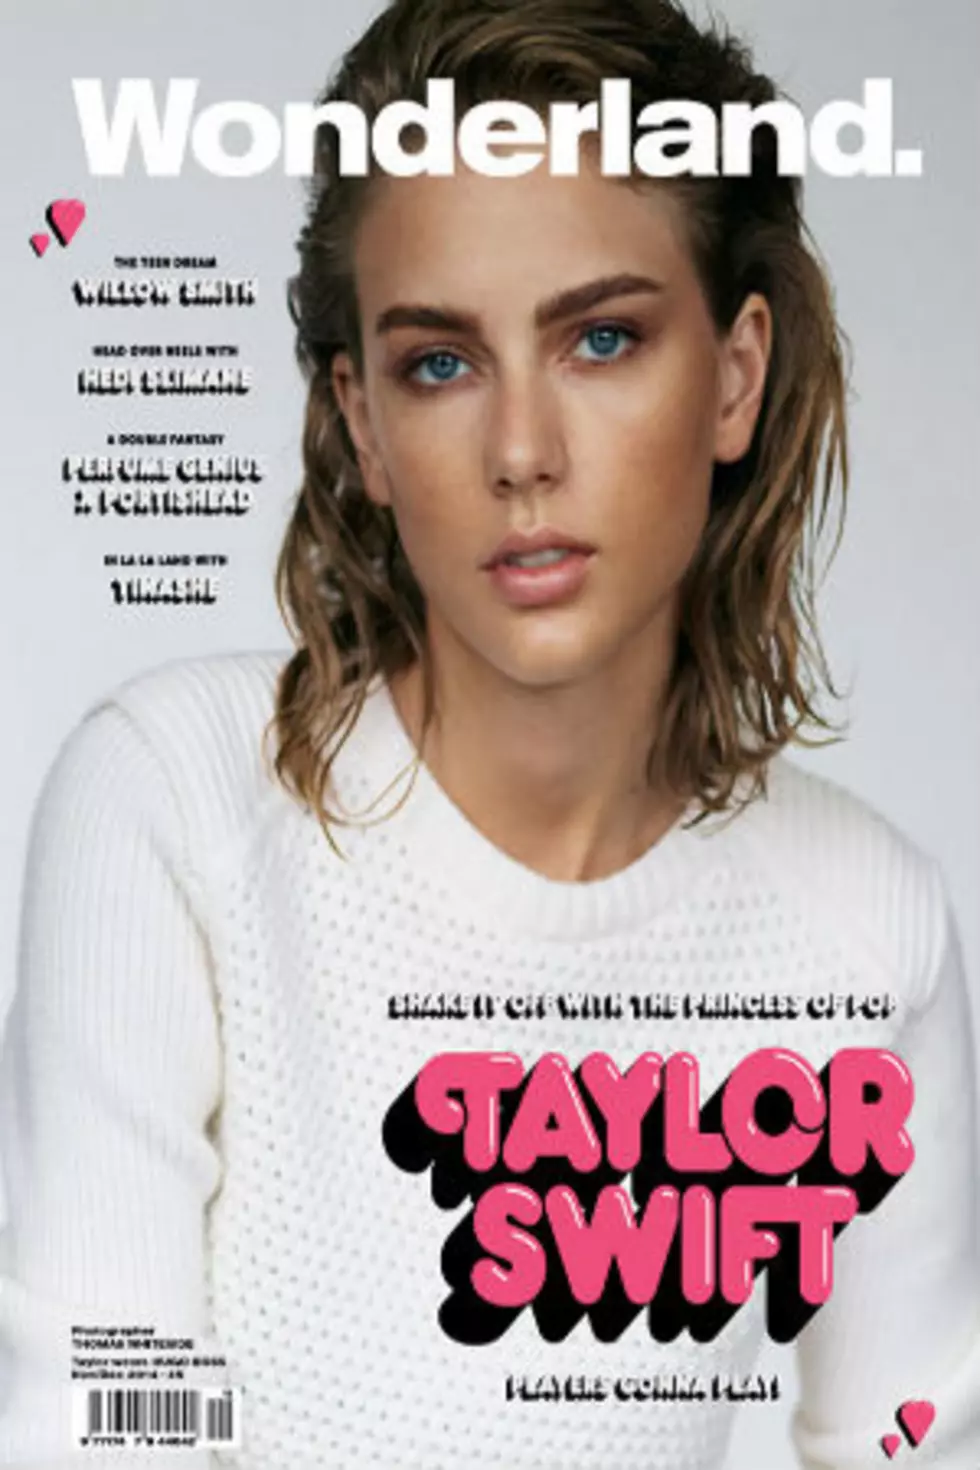 Taylor Swift, Is That You? Star Graces Wonderland Cover Looking Very Different